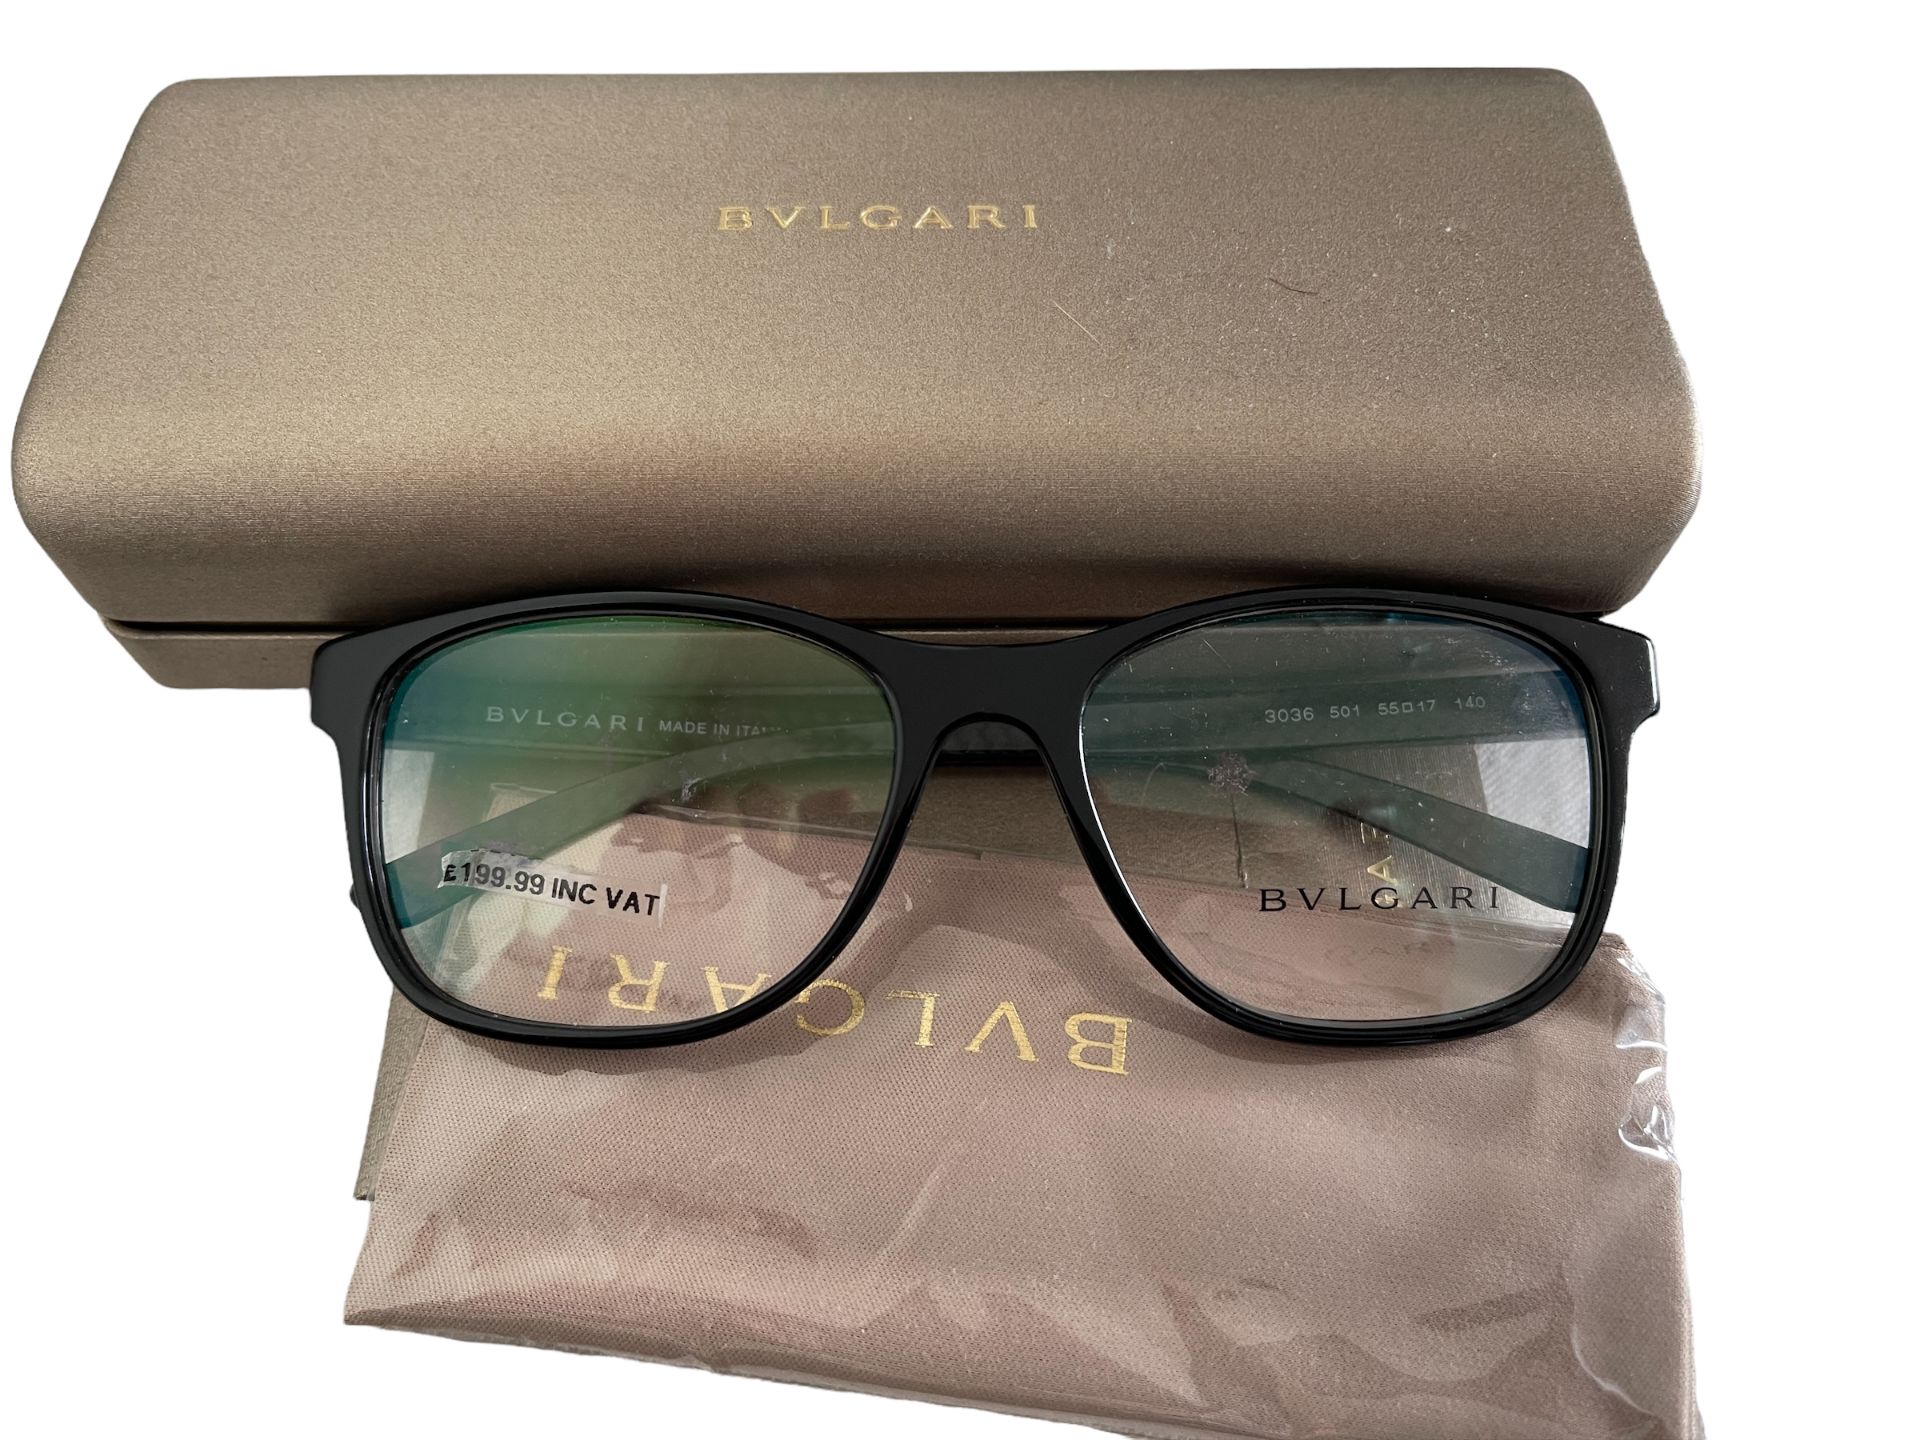 Bvlgari Gents Spectacle Frames with Original Case Surplus Stock or Ex Demo - Image 7 of 7